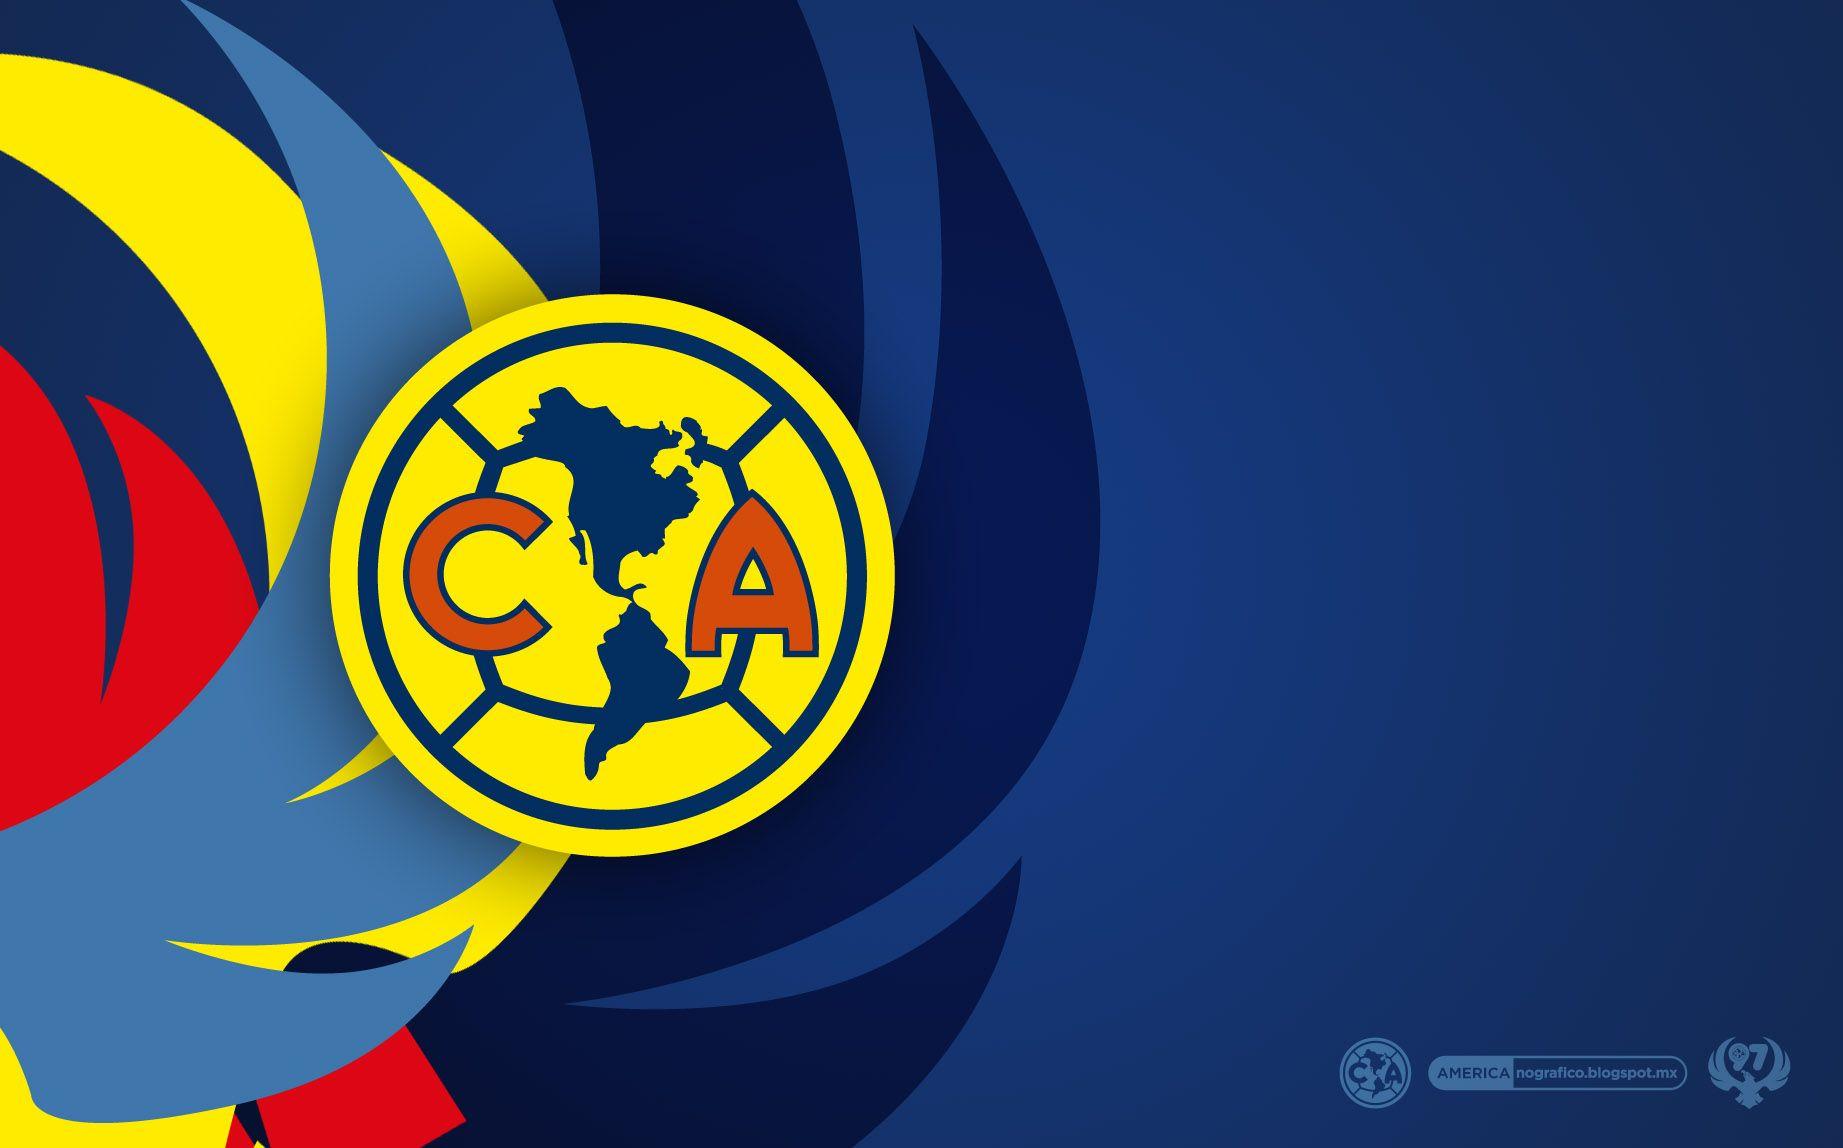 Club America Wallpapers - Top Free Club America Backgrounds